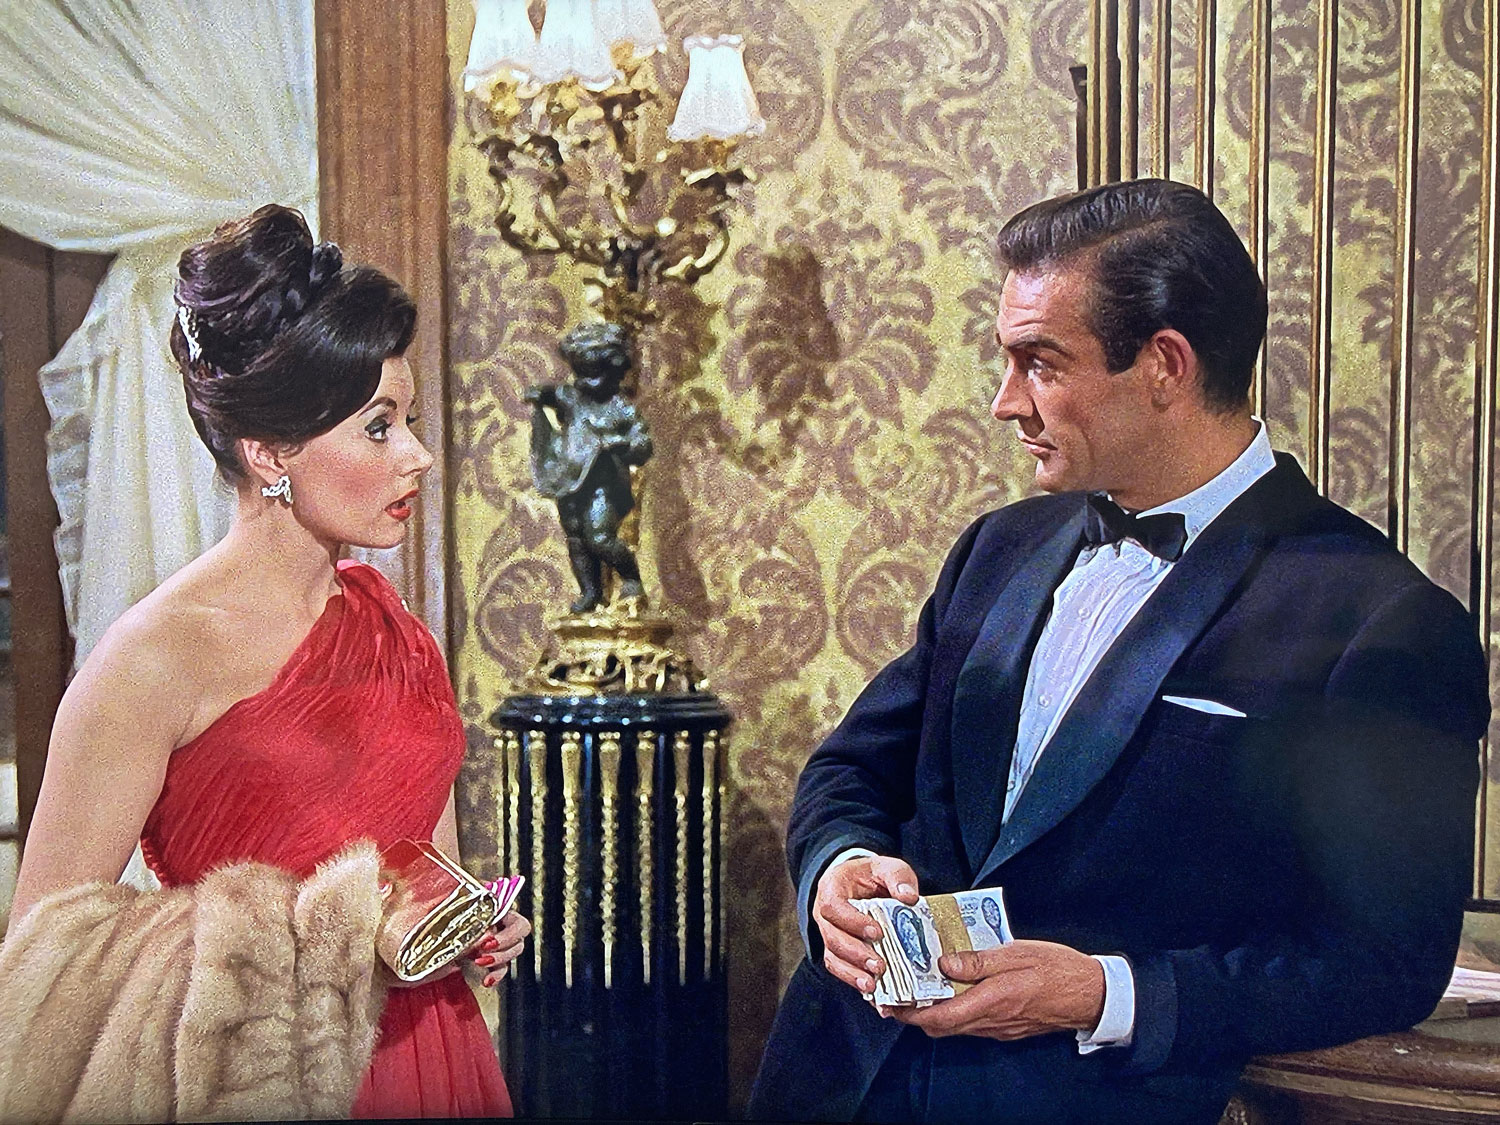 Anthony Sinclair tuxedo Connery in Dr No talking to Eunice Grayson